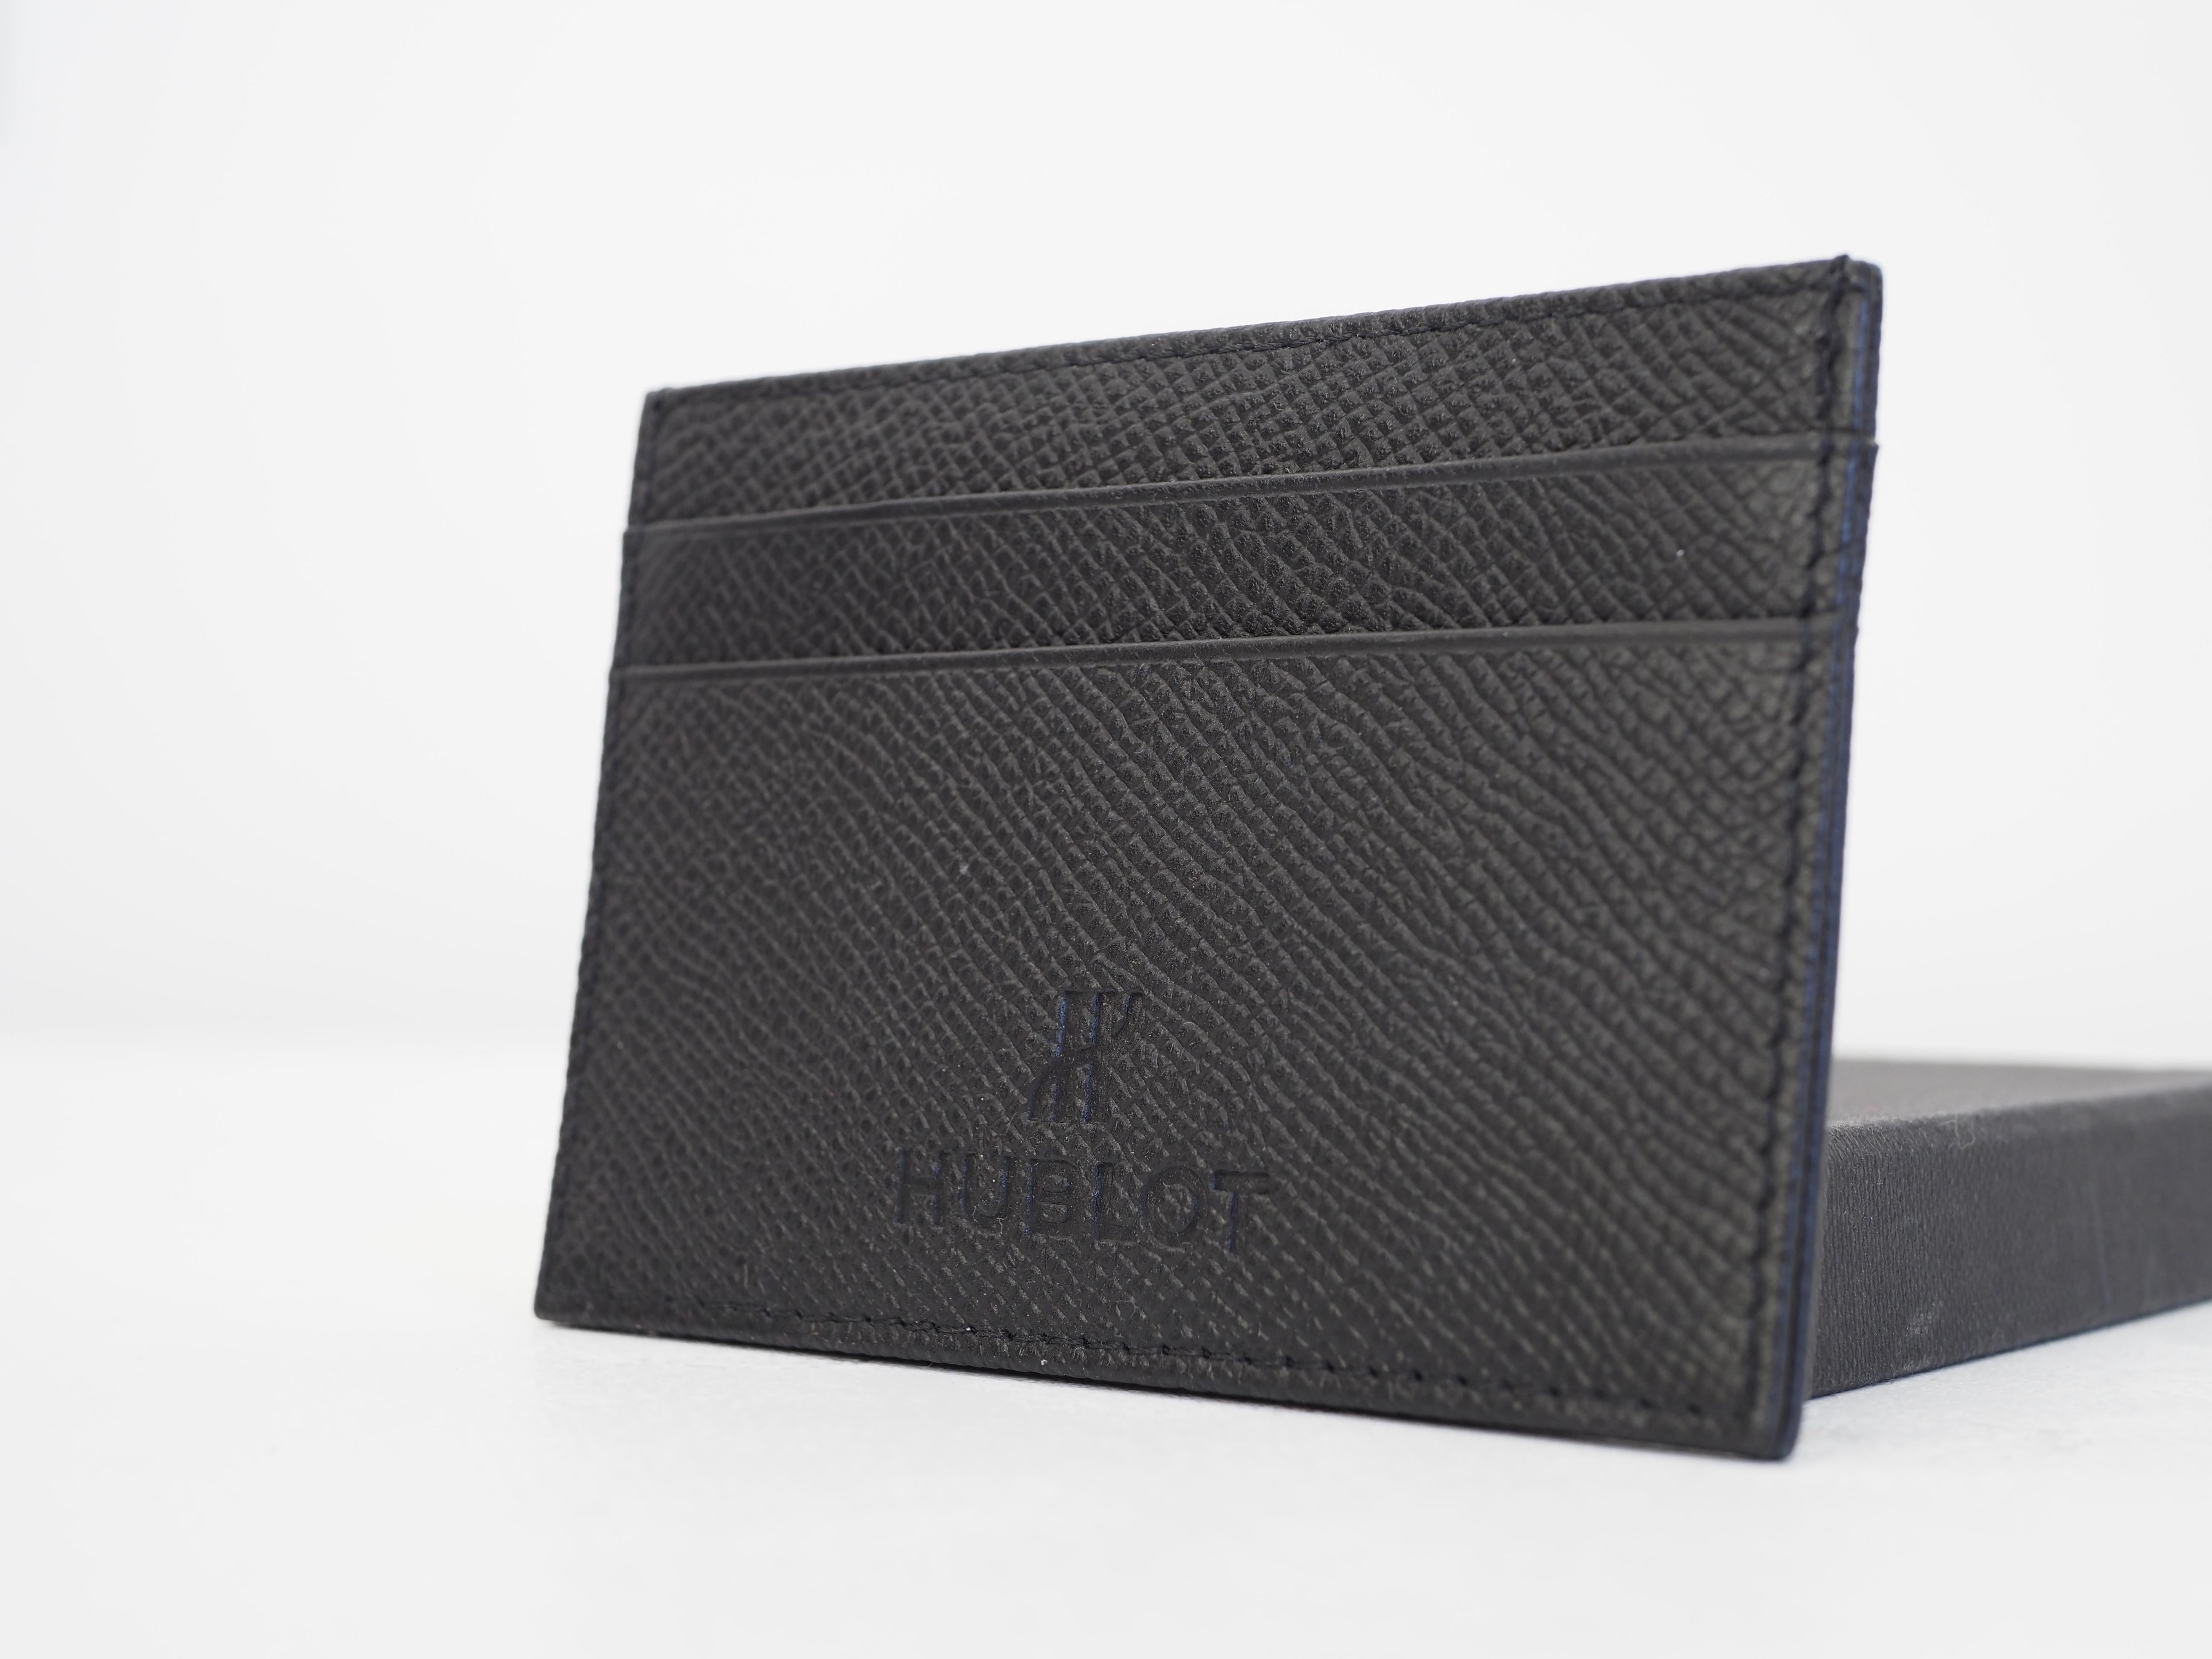 Hublot black leather cardholder still with box In Excellent Condition For Sale In Capri, IT